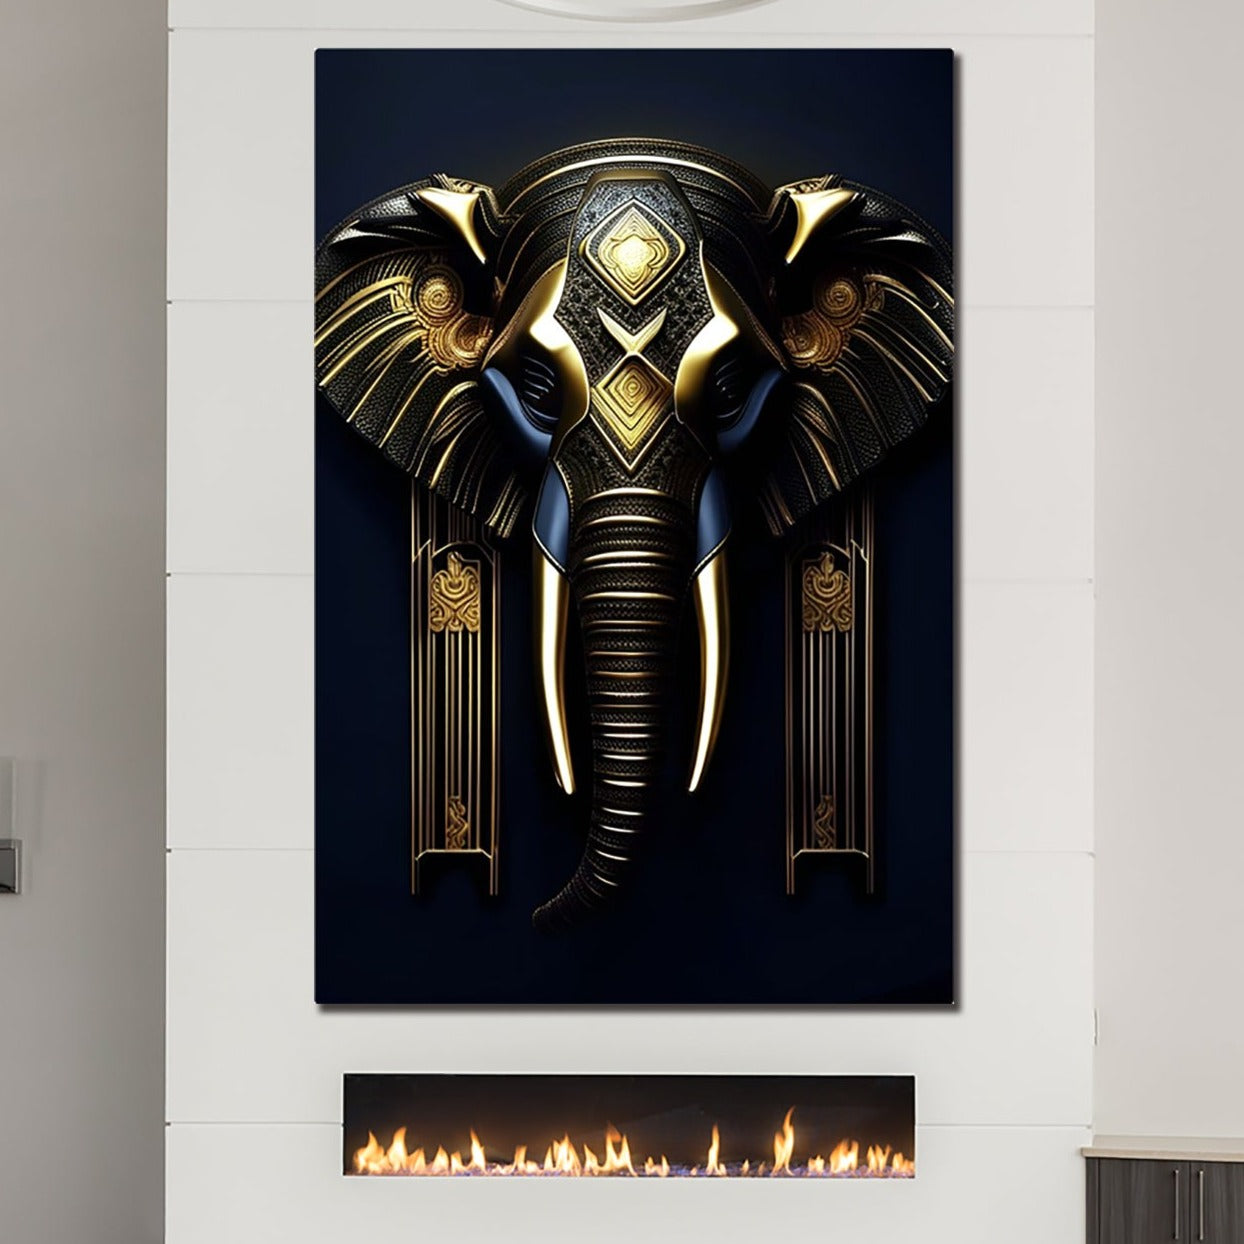 Blue and Gold Elephant Head Art Deco Style Printed on Eco-Friendly Recycled Aluminum hung above fireplace